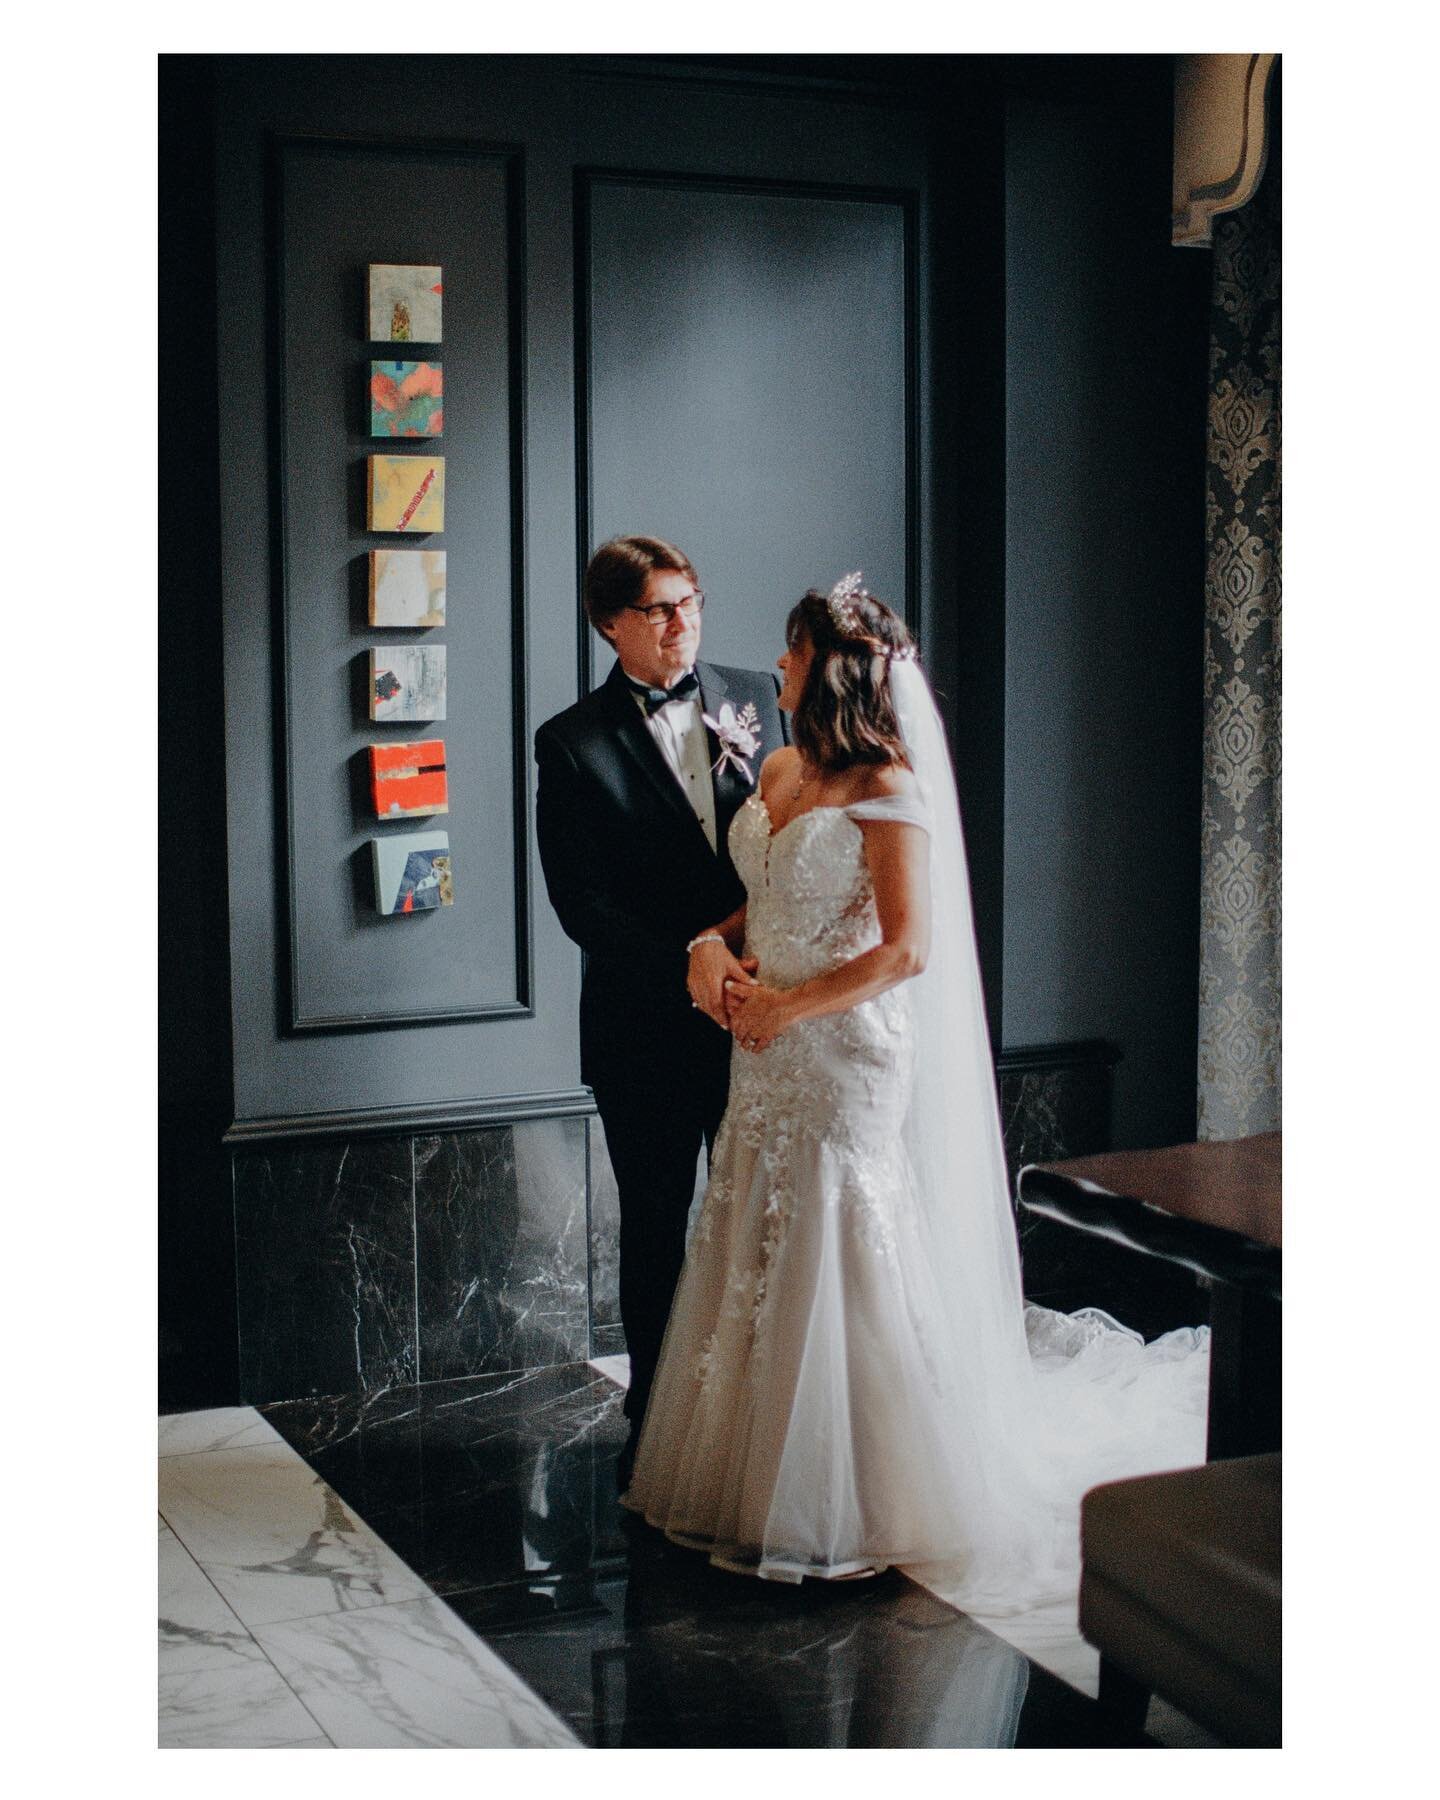 Mona and Dale on film at The Edwin
.
.
.
#spencerpurcellfilms #bridetobe #bridetobe2024 #elopementwedding  #chattanoogaweddingphotographer #realmoments #liveinthenow #authenticlovemag #weddingphotographer #weddingphotography #lovestories #engaged #gr